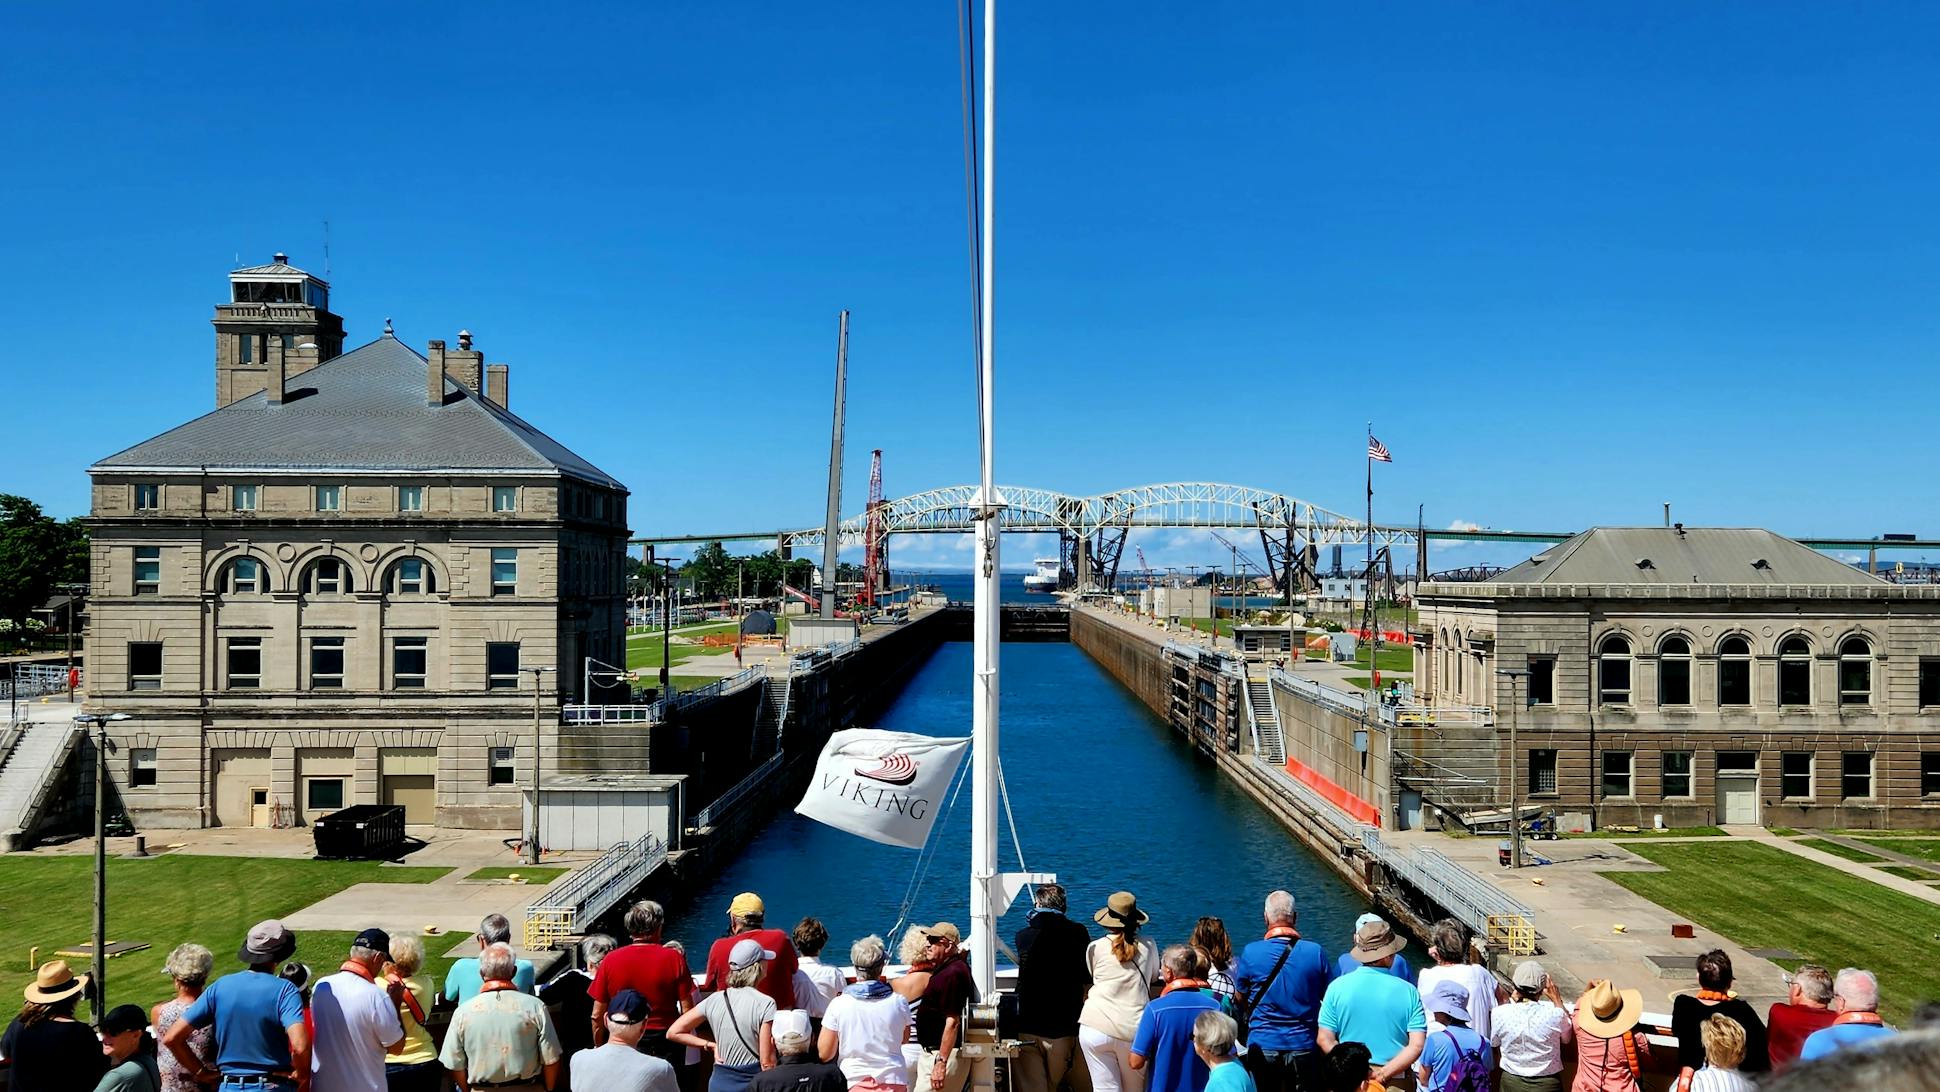 Passengers watched from the bow of Viking Octantis as the vessel slowly entered the Poe Lock in Sault Ste. Marie, Mich., on its way to Lake Superior.